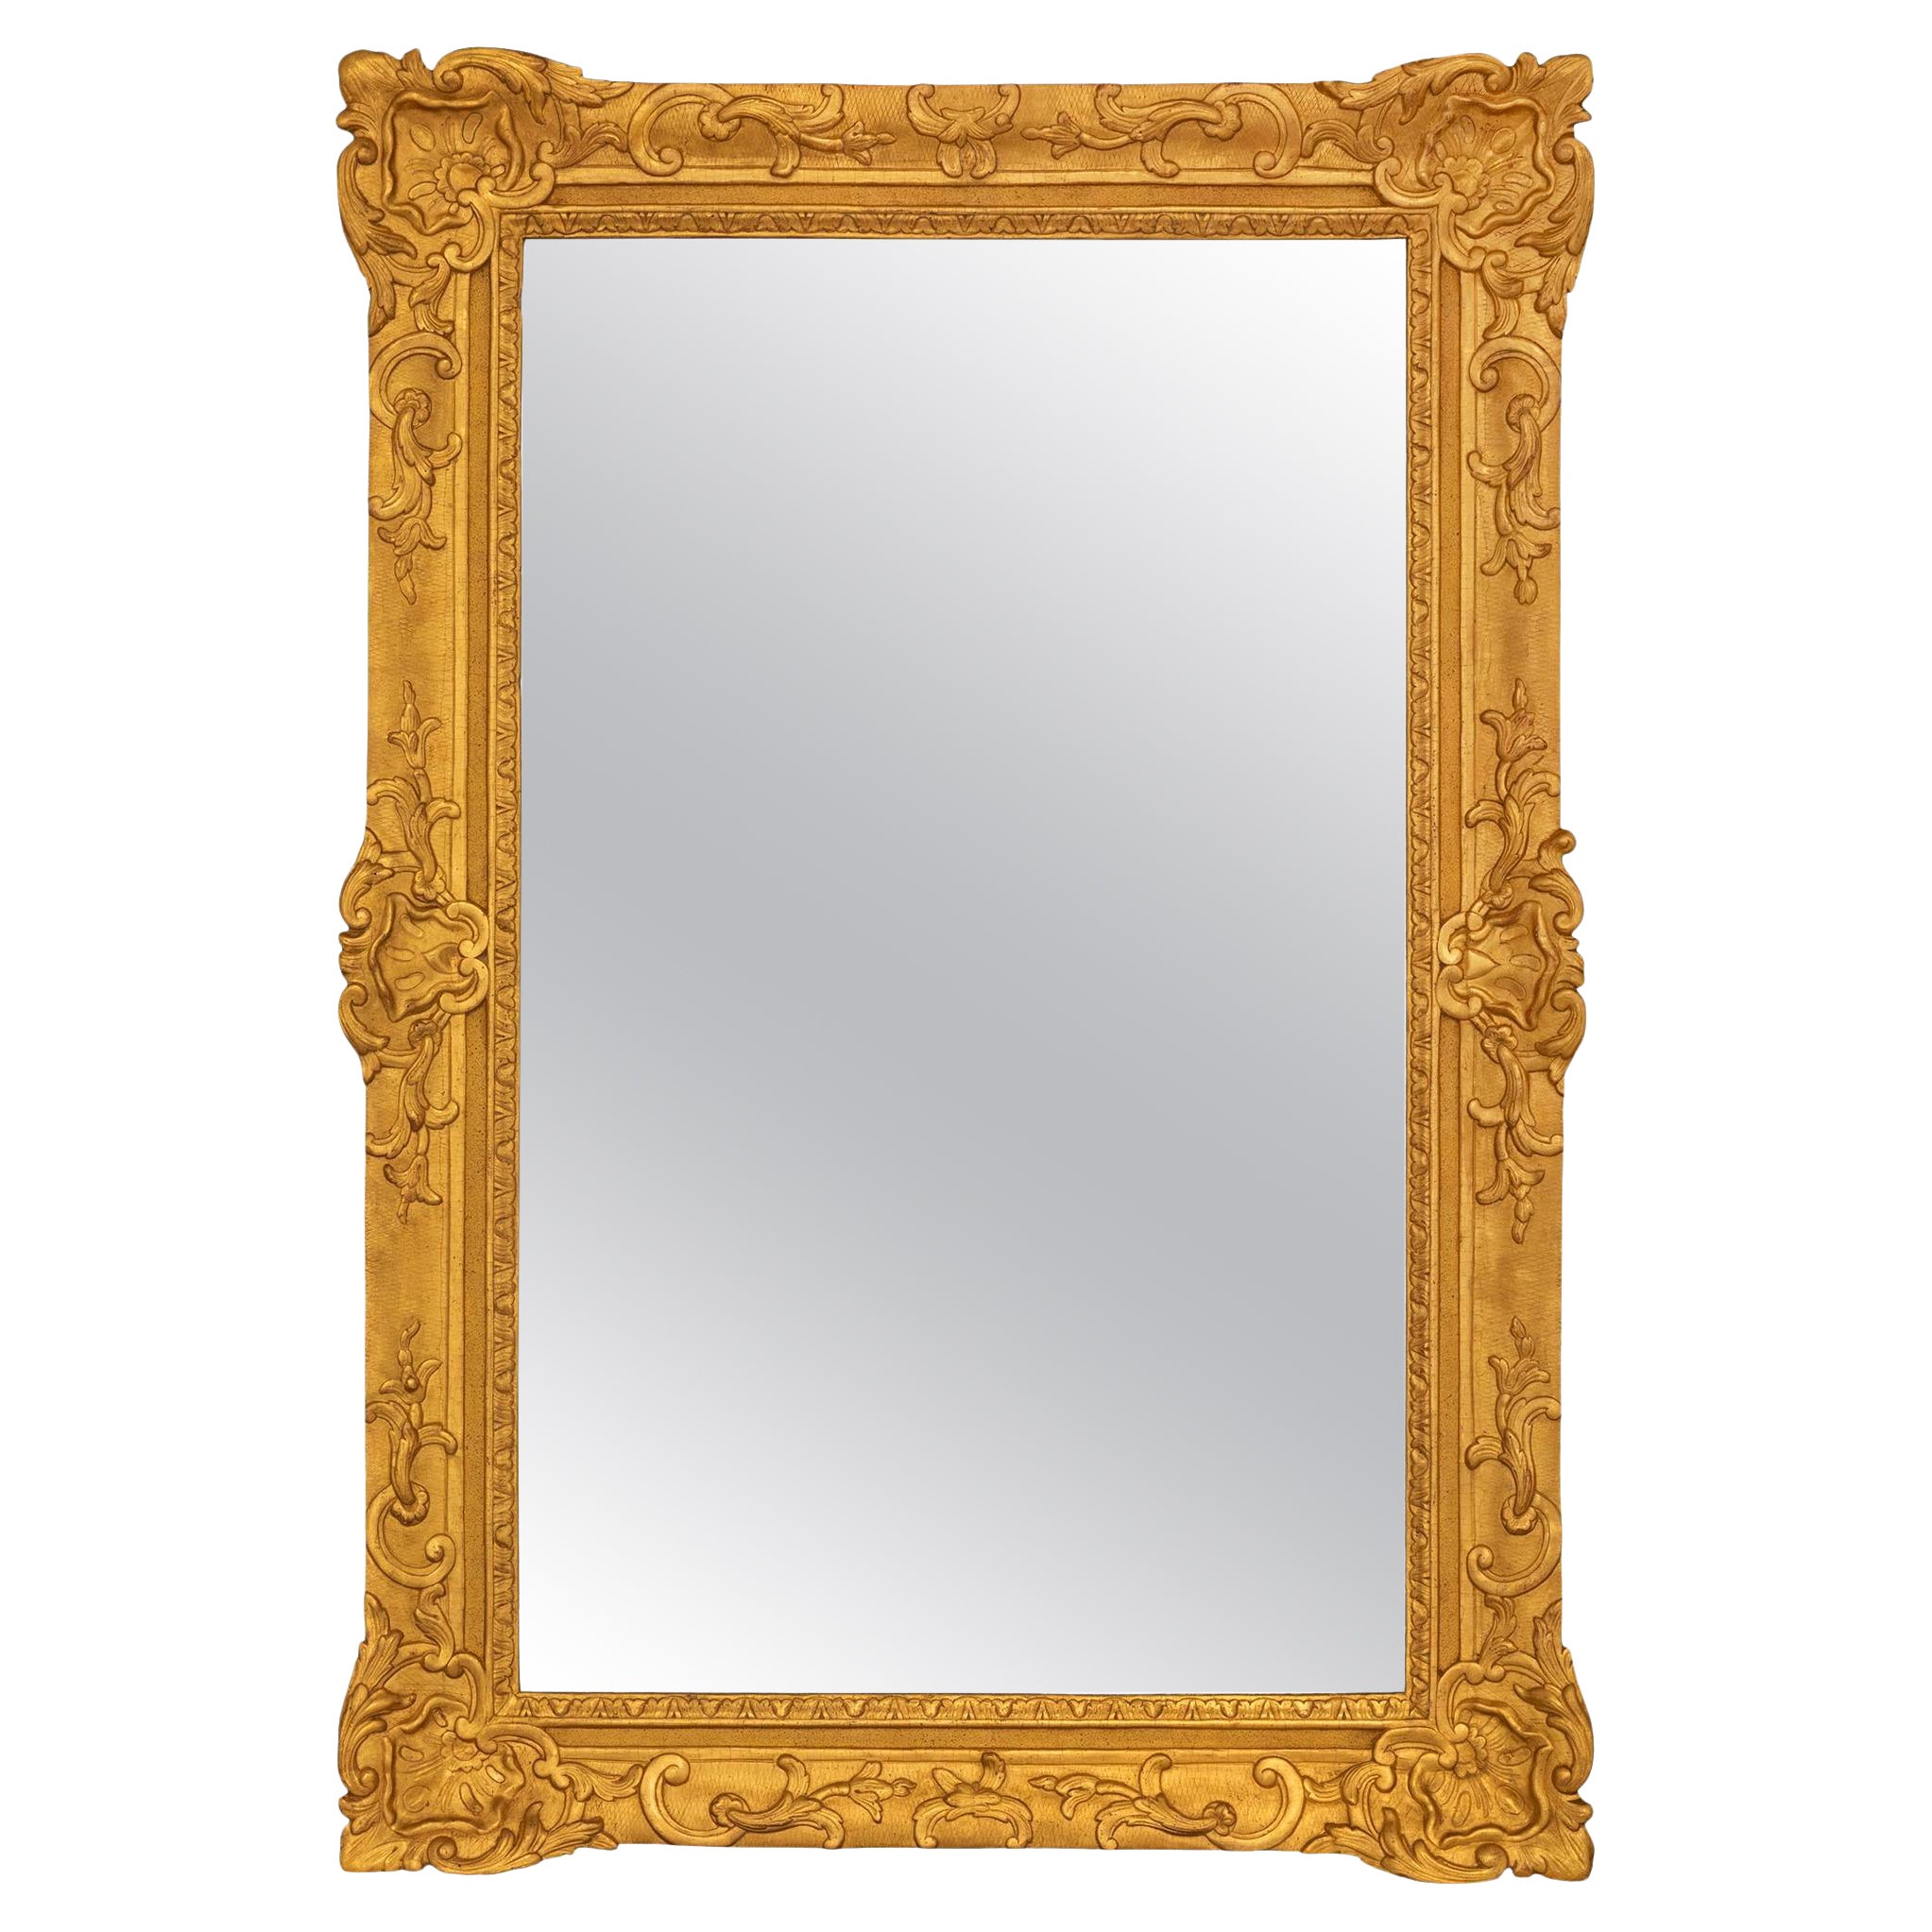 A French 18th century Regence period rectangular giltwood mirror For Sale